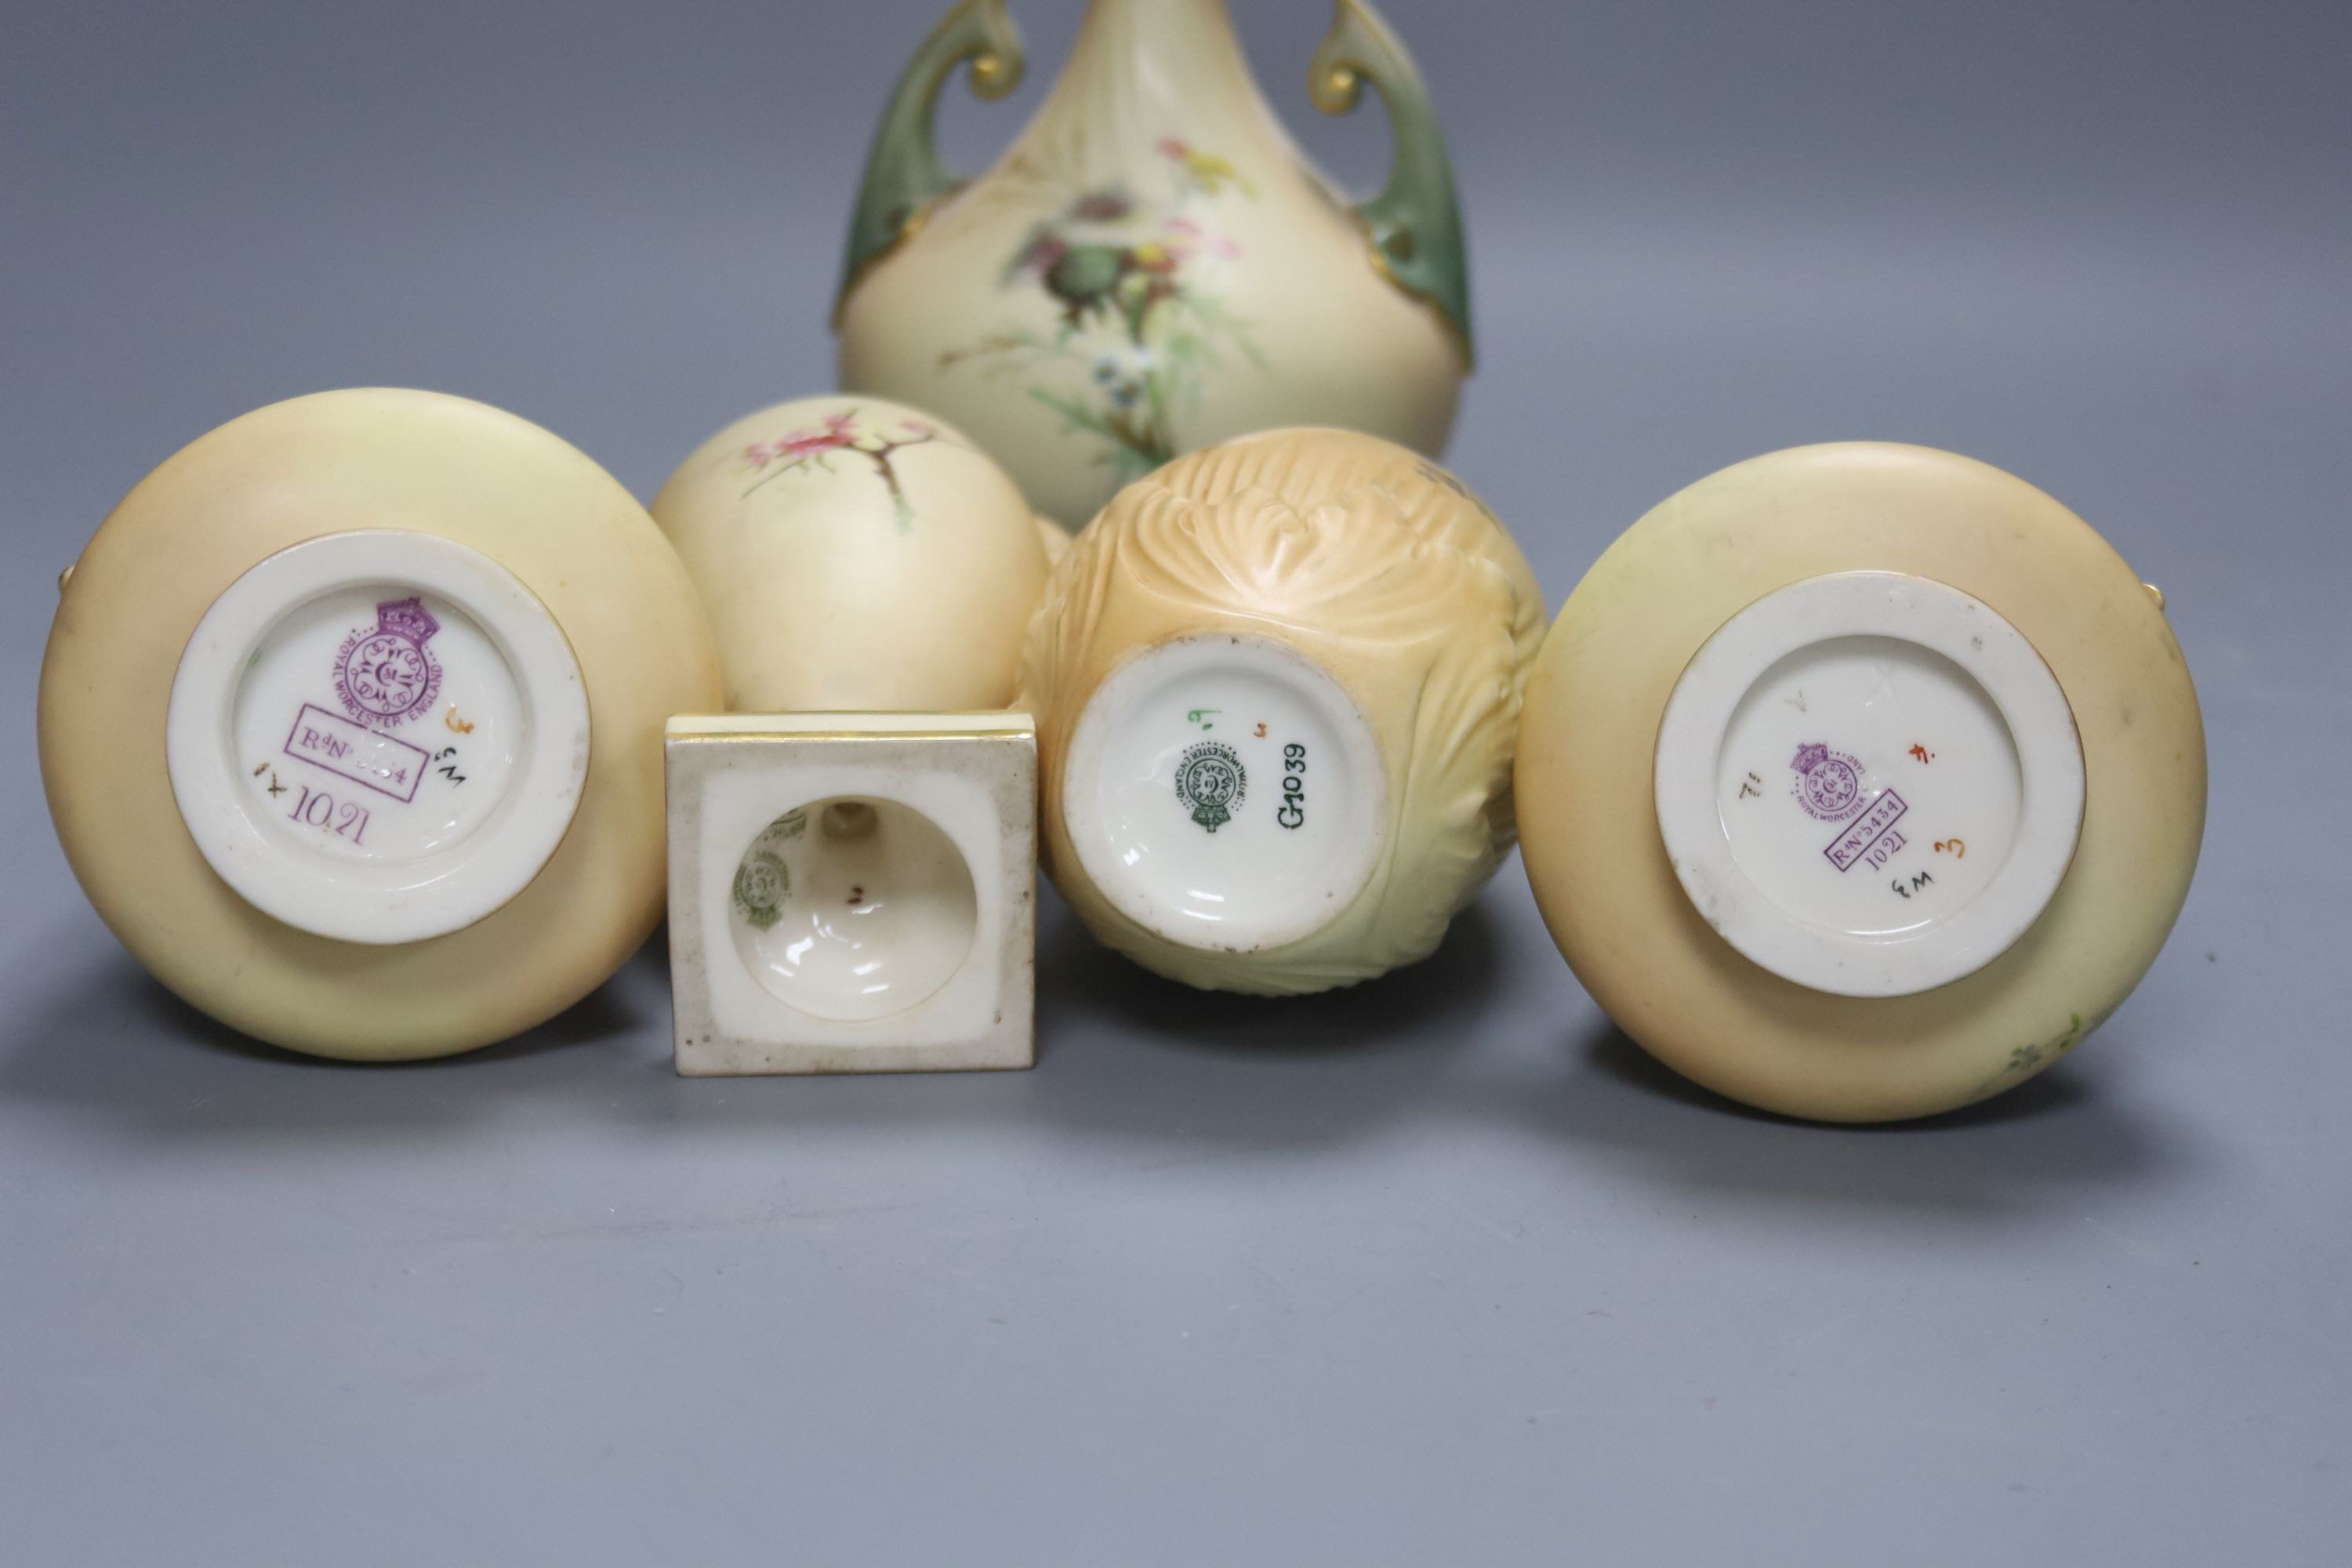 A group of Royal Worcester blush ivory - a pair of vases, and three other vases, 25cm